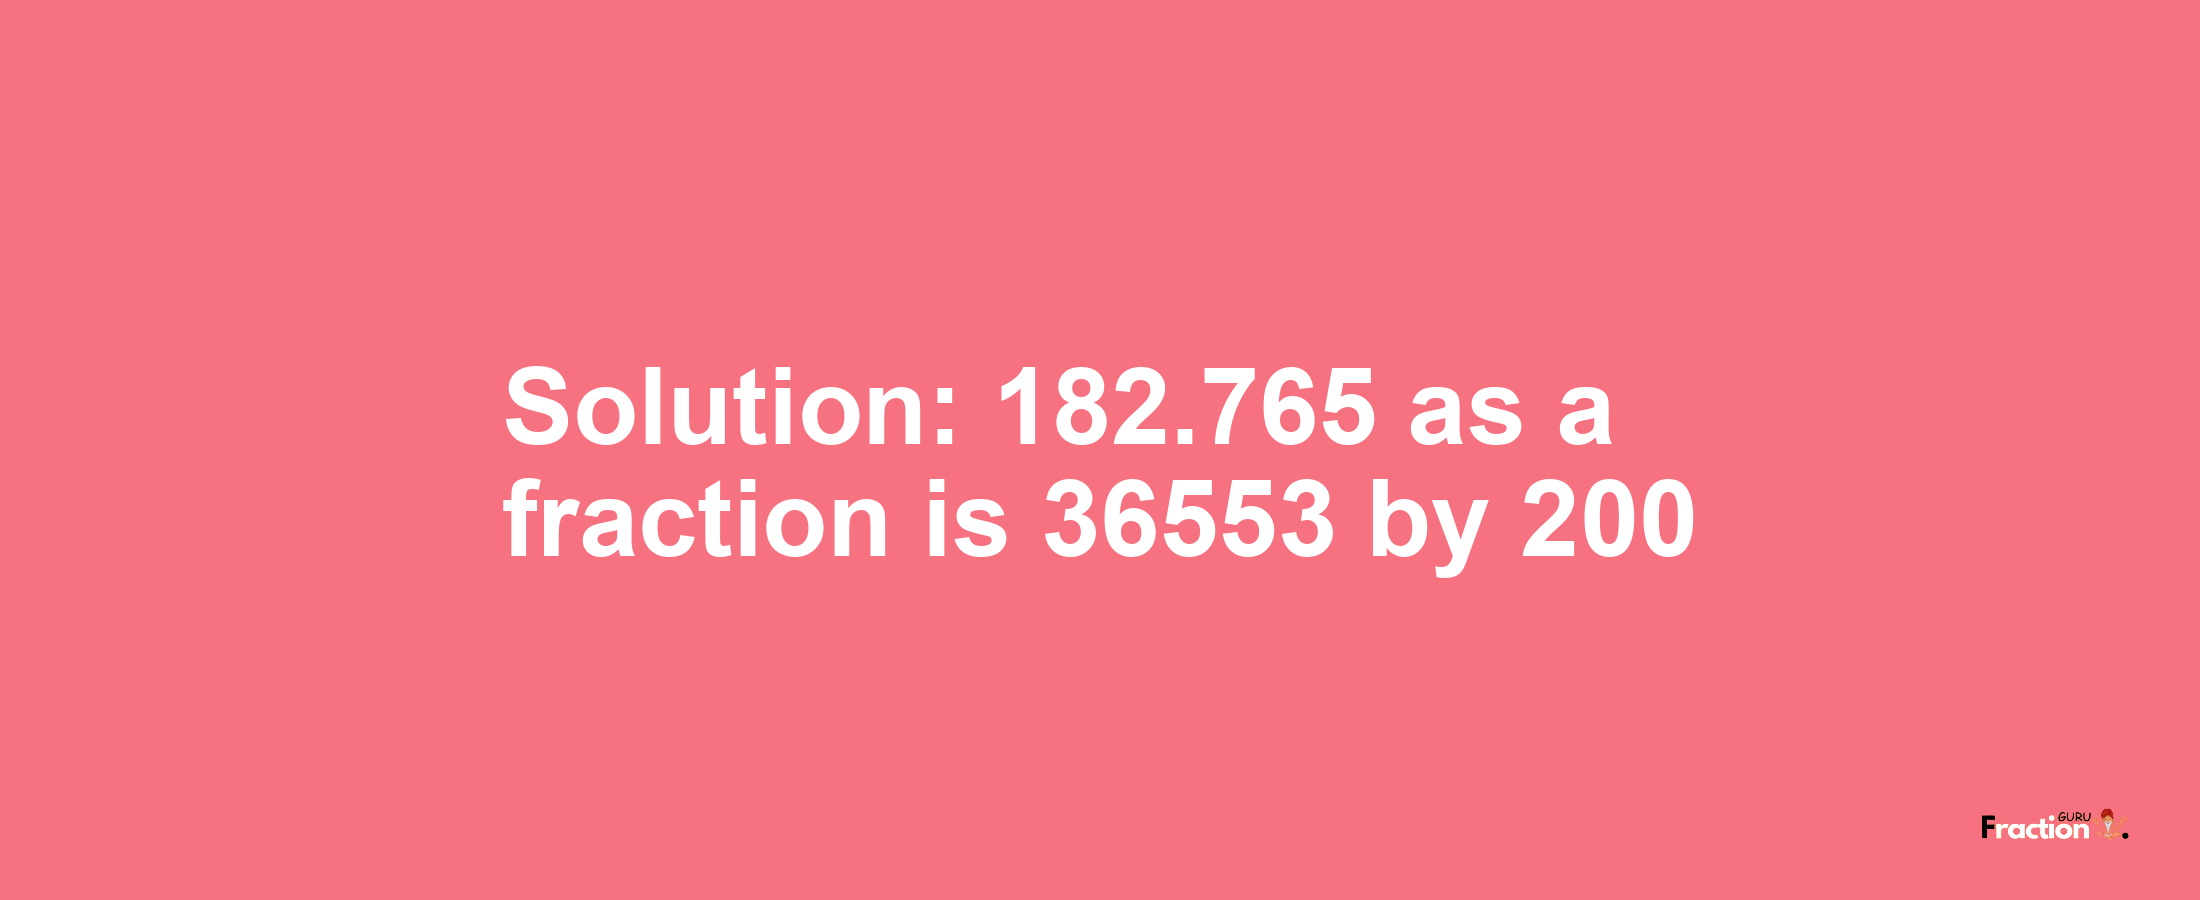 Solution:182.765 as a fraction is 36553/200